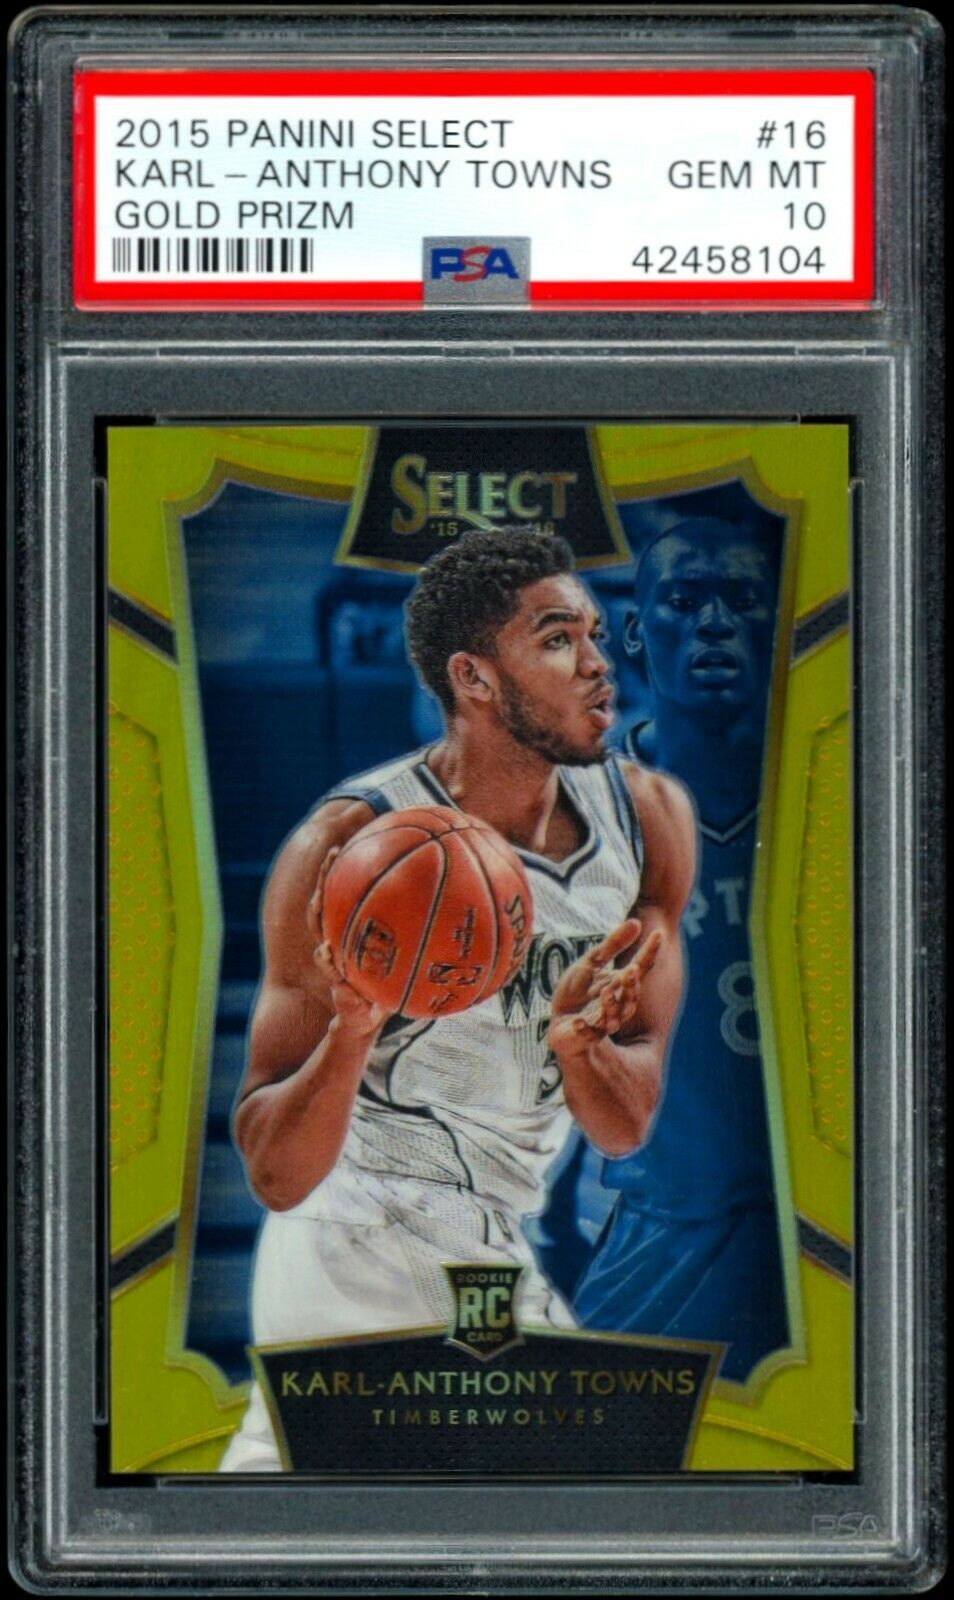 2015-16 Panini Select Gold Prizm /10 Karl-Anthony Towns ROOKIE RC #16 PSA 10